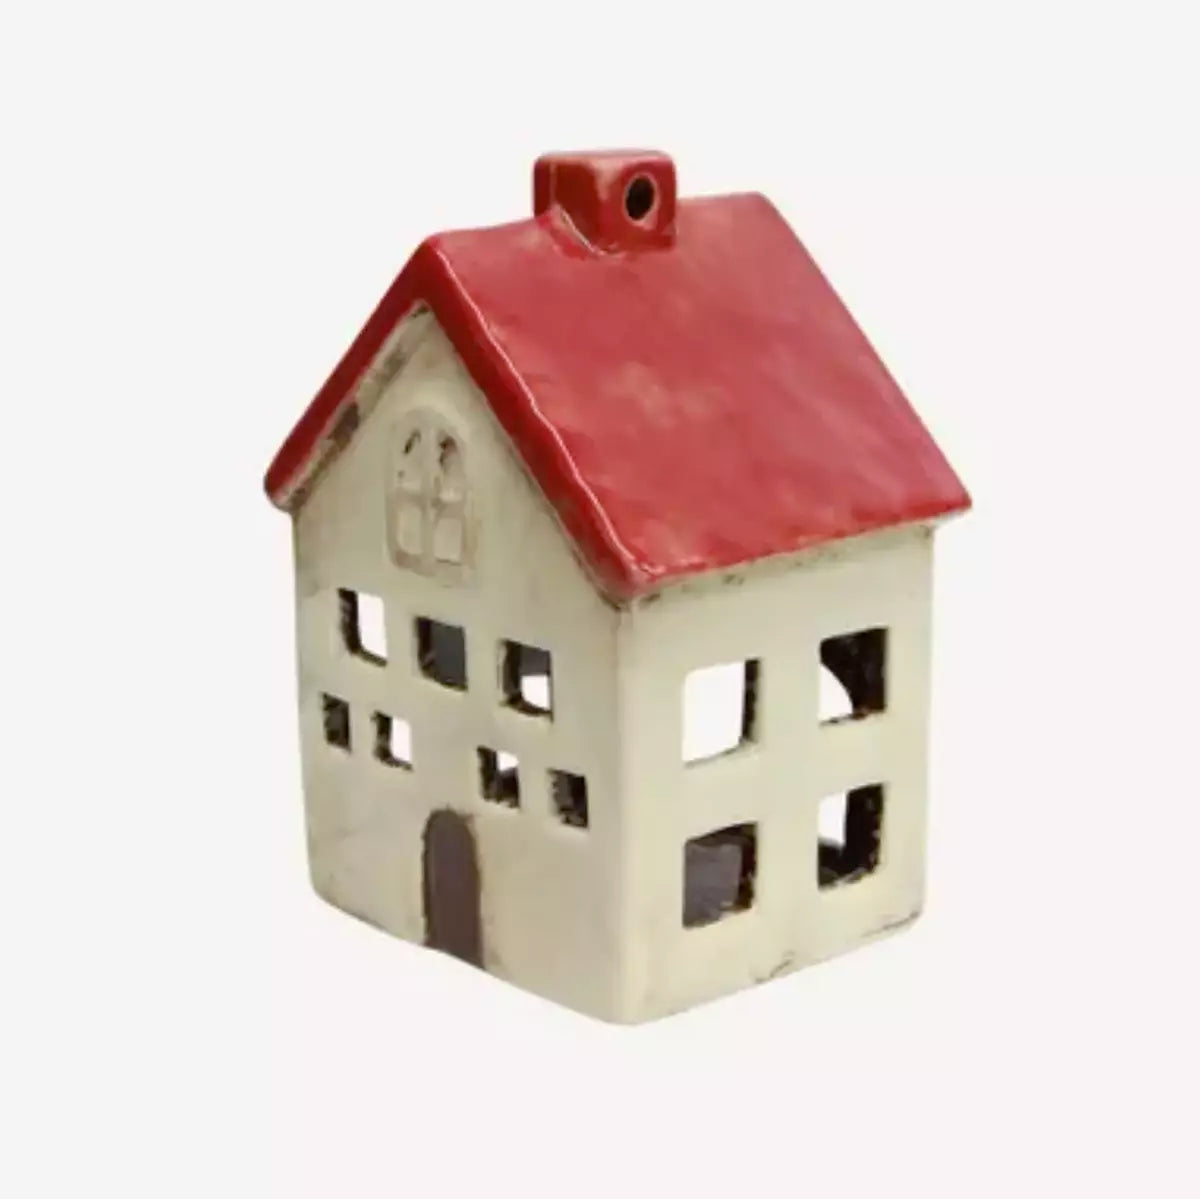 A French Country Collections Christmas Village Villa, a ceramic house ornament with a red roof, perfect for a Christmas village or as a tea light holder.